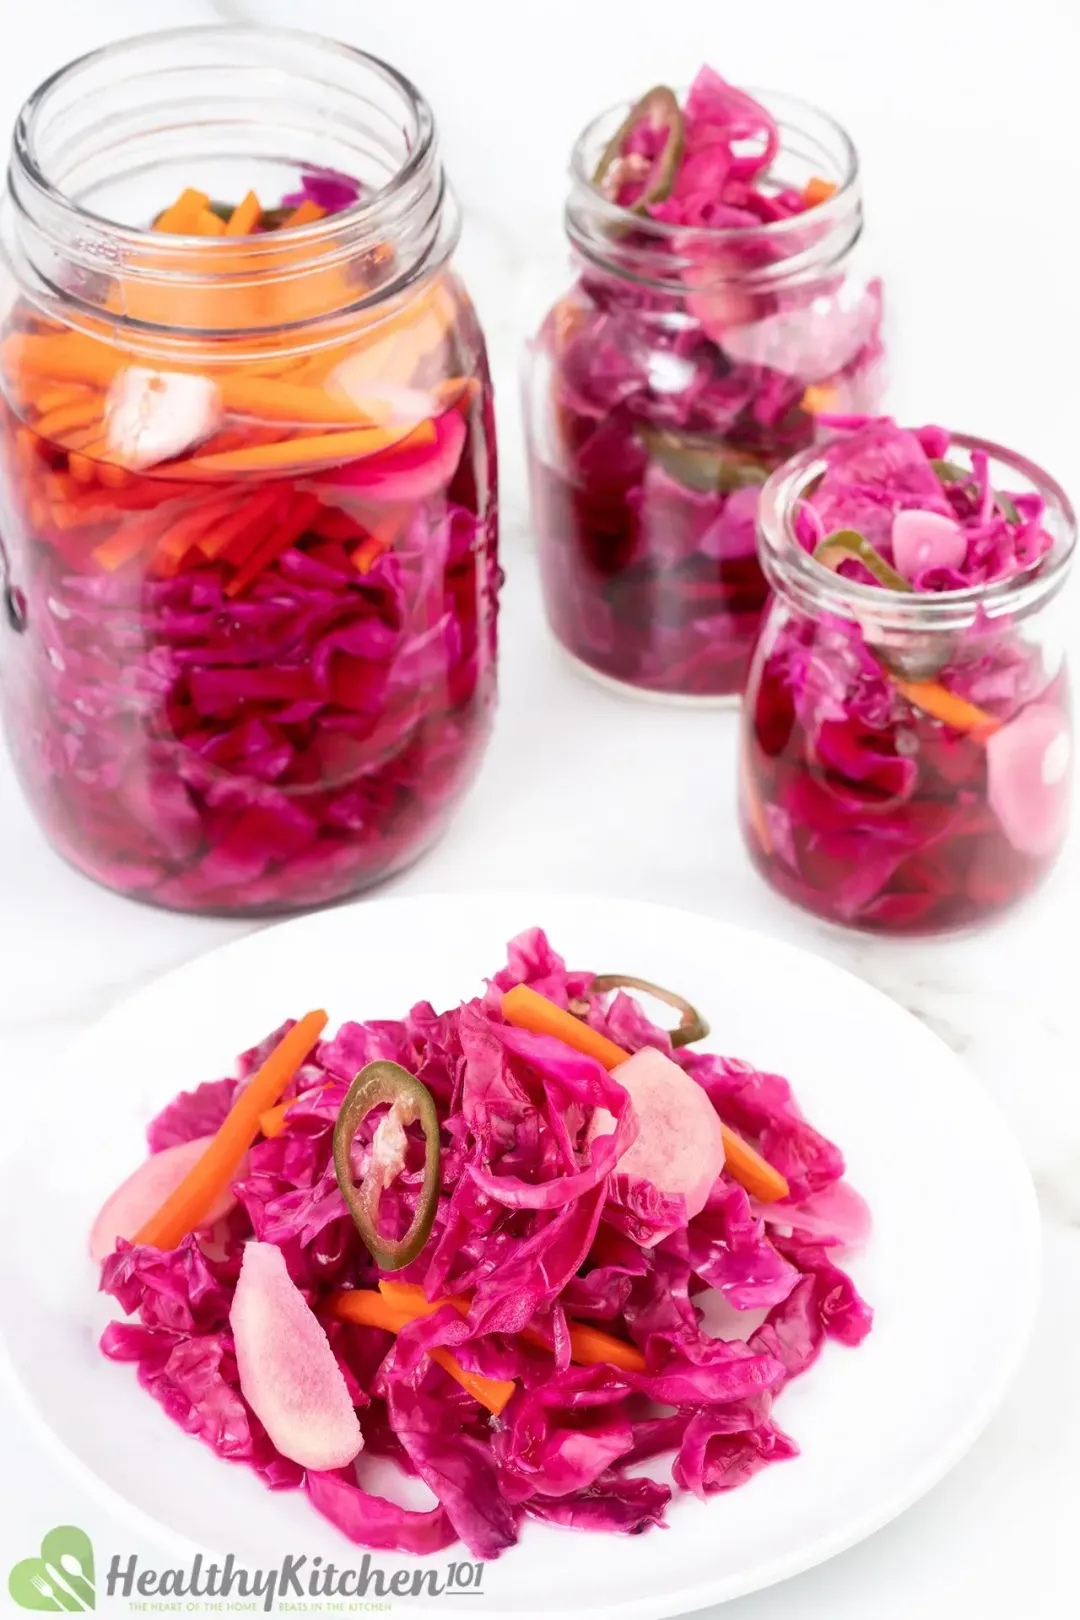 What Do You Eat with Pickled Red Cabbage